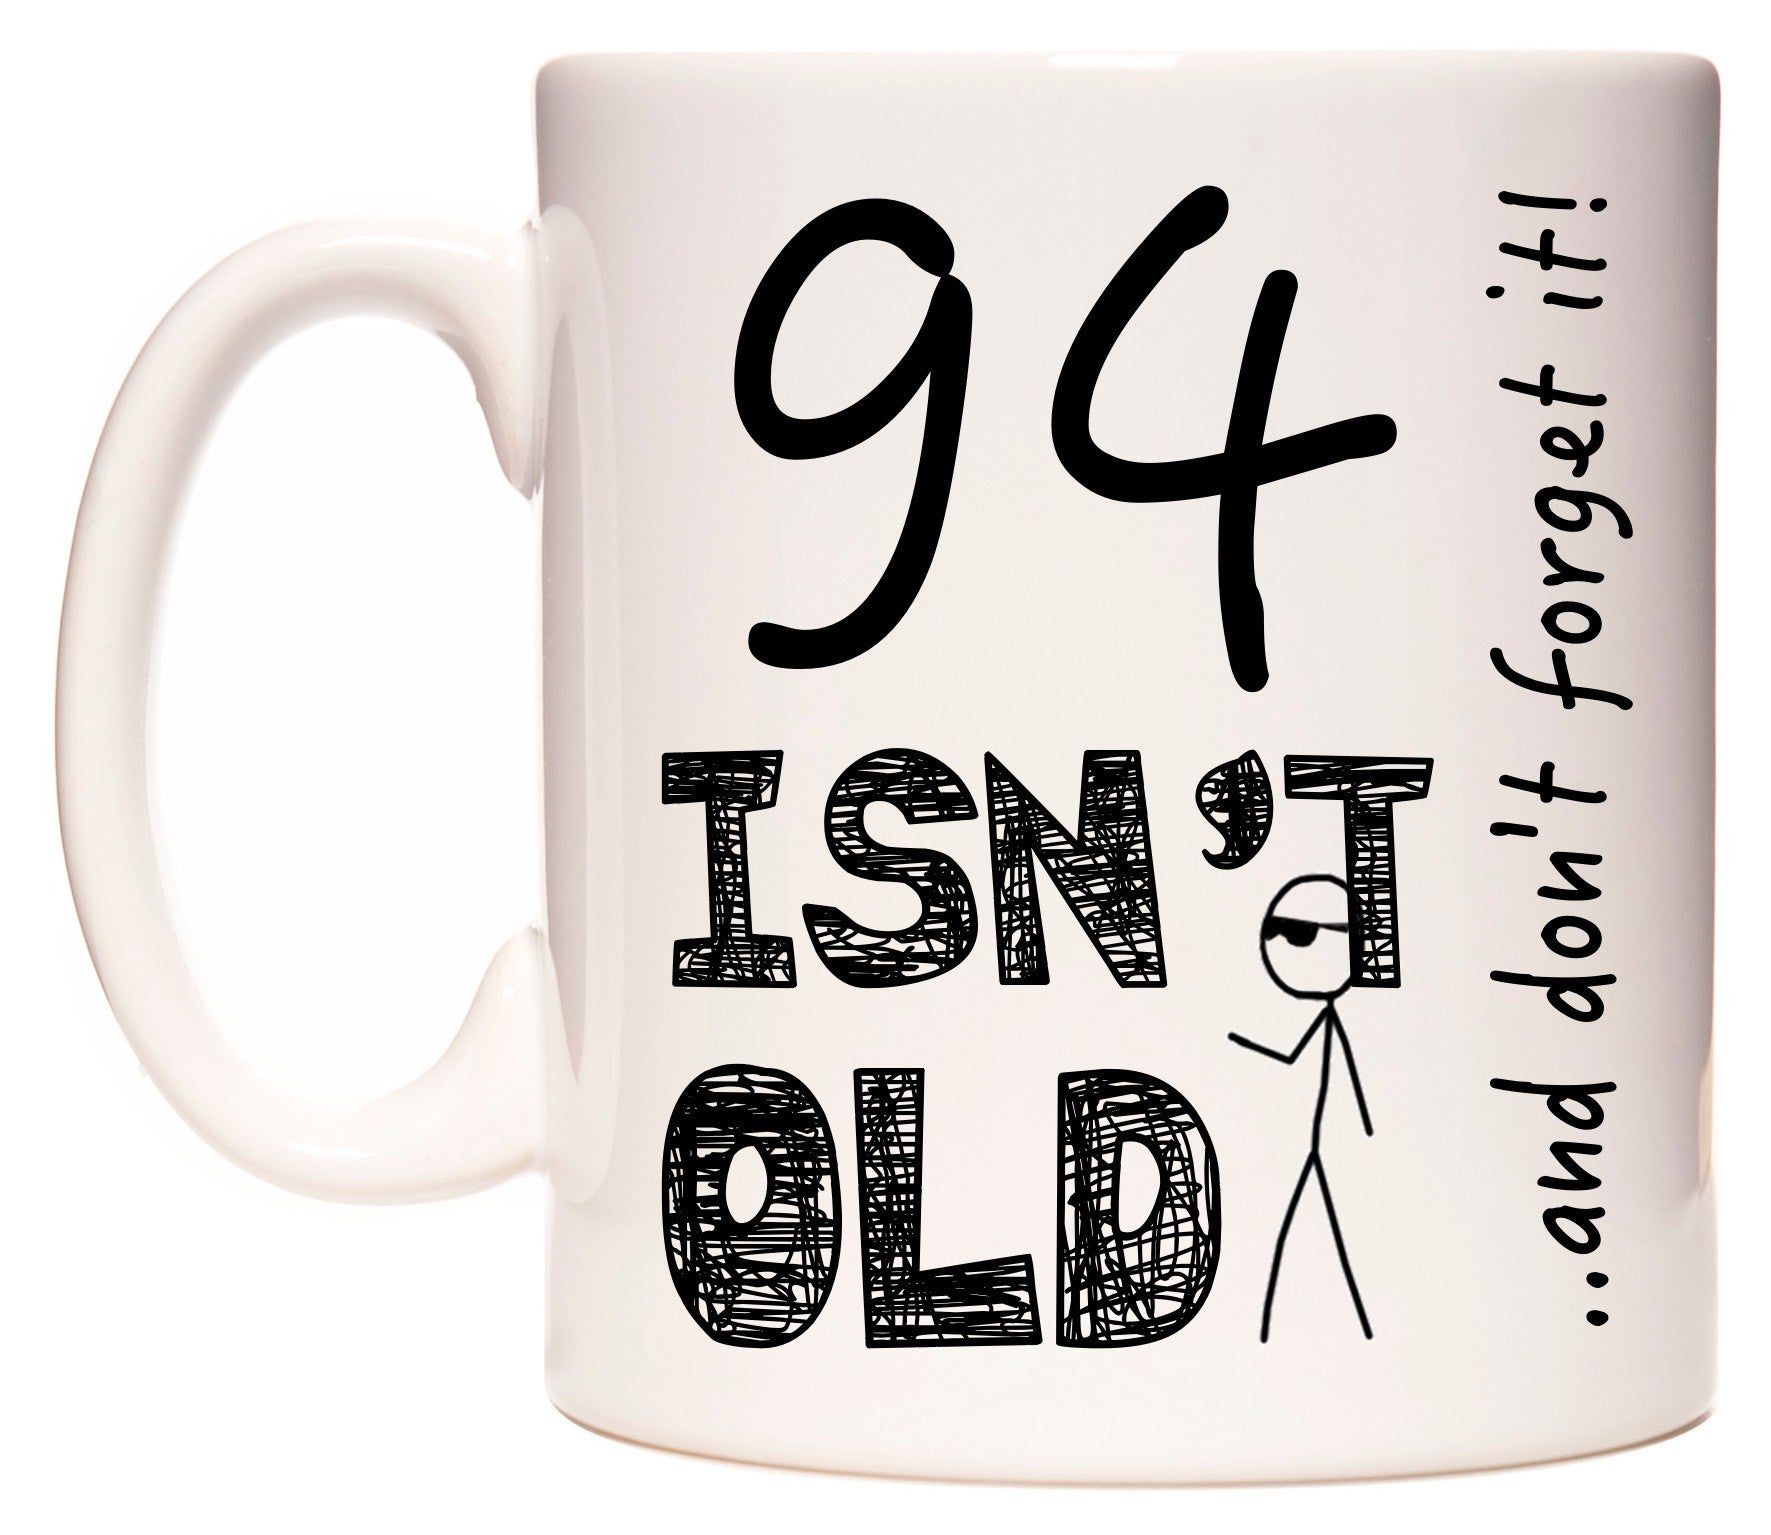 This mug features 94 Isn't Old